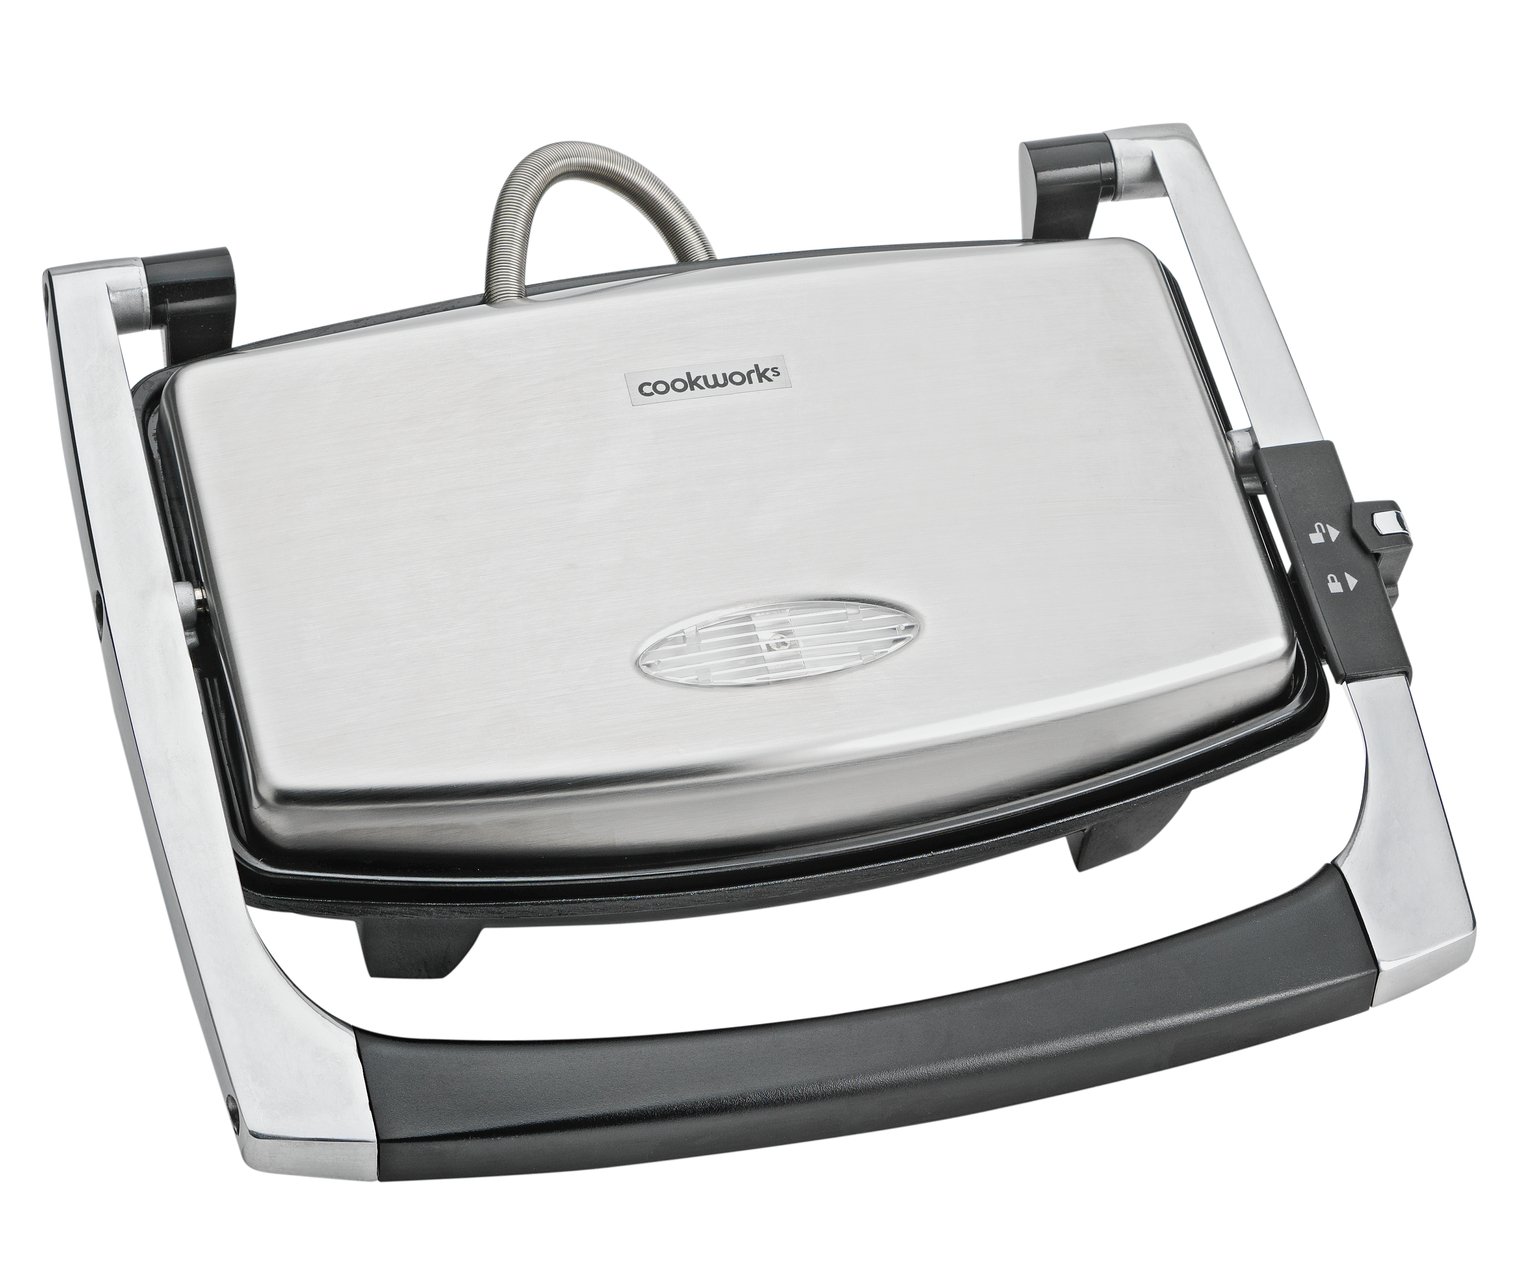 Cookworks 2 Portion Panini Grill - Stainless Steel